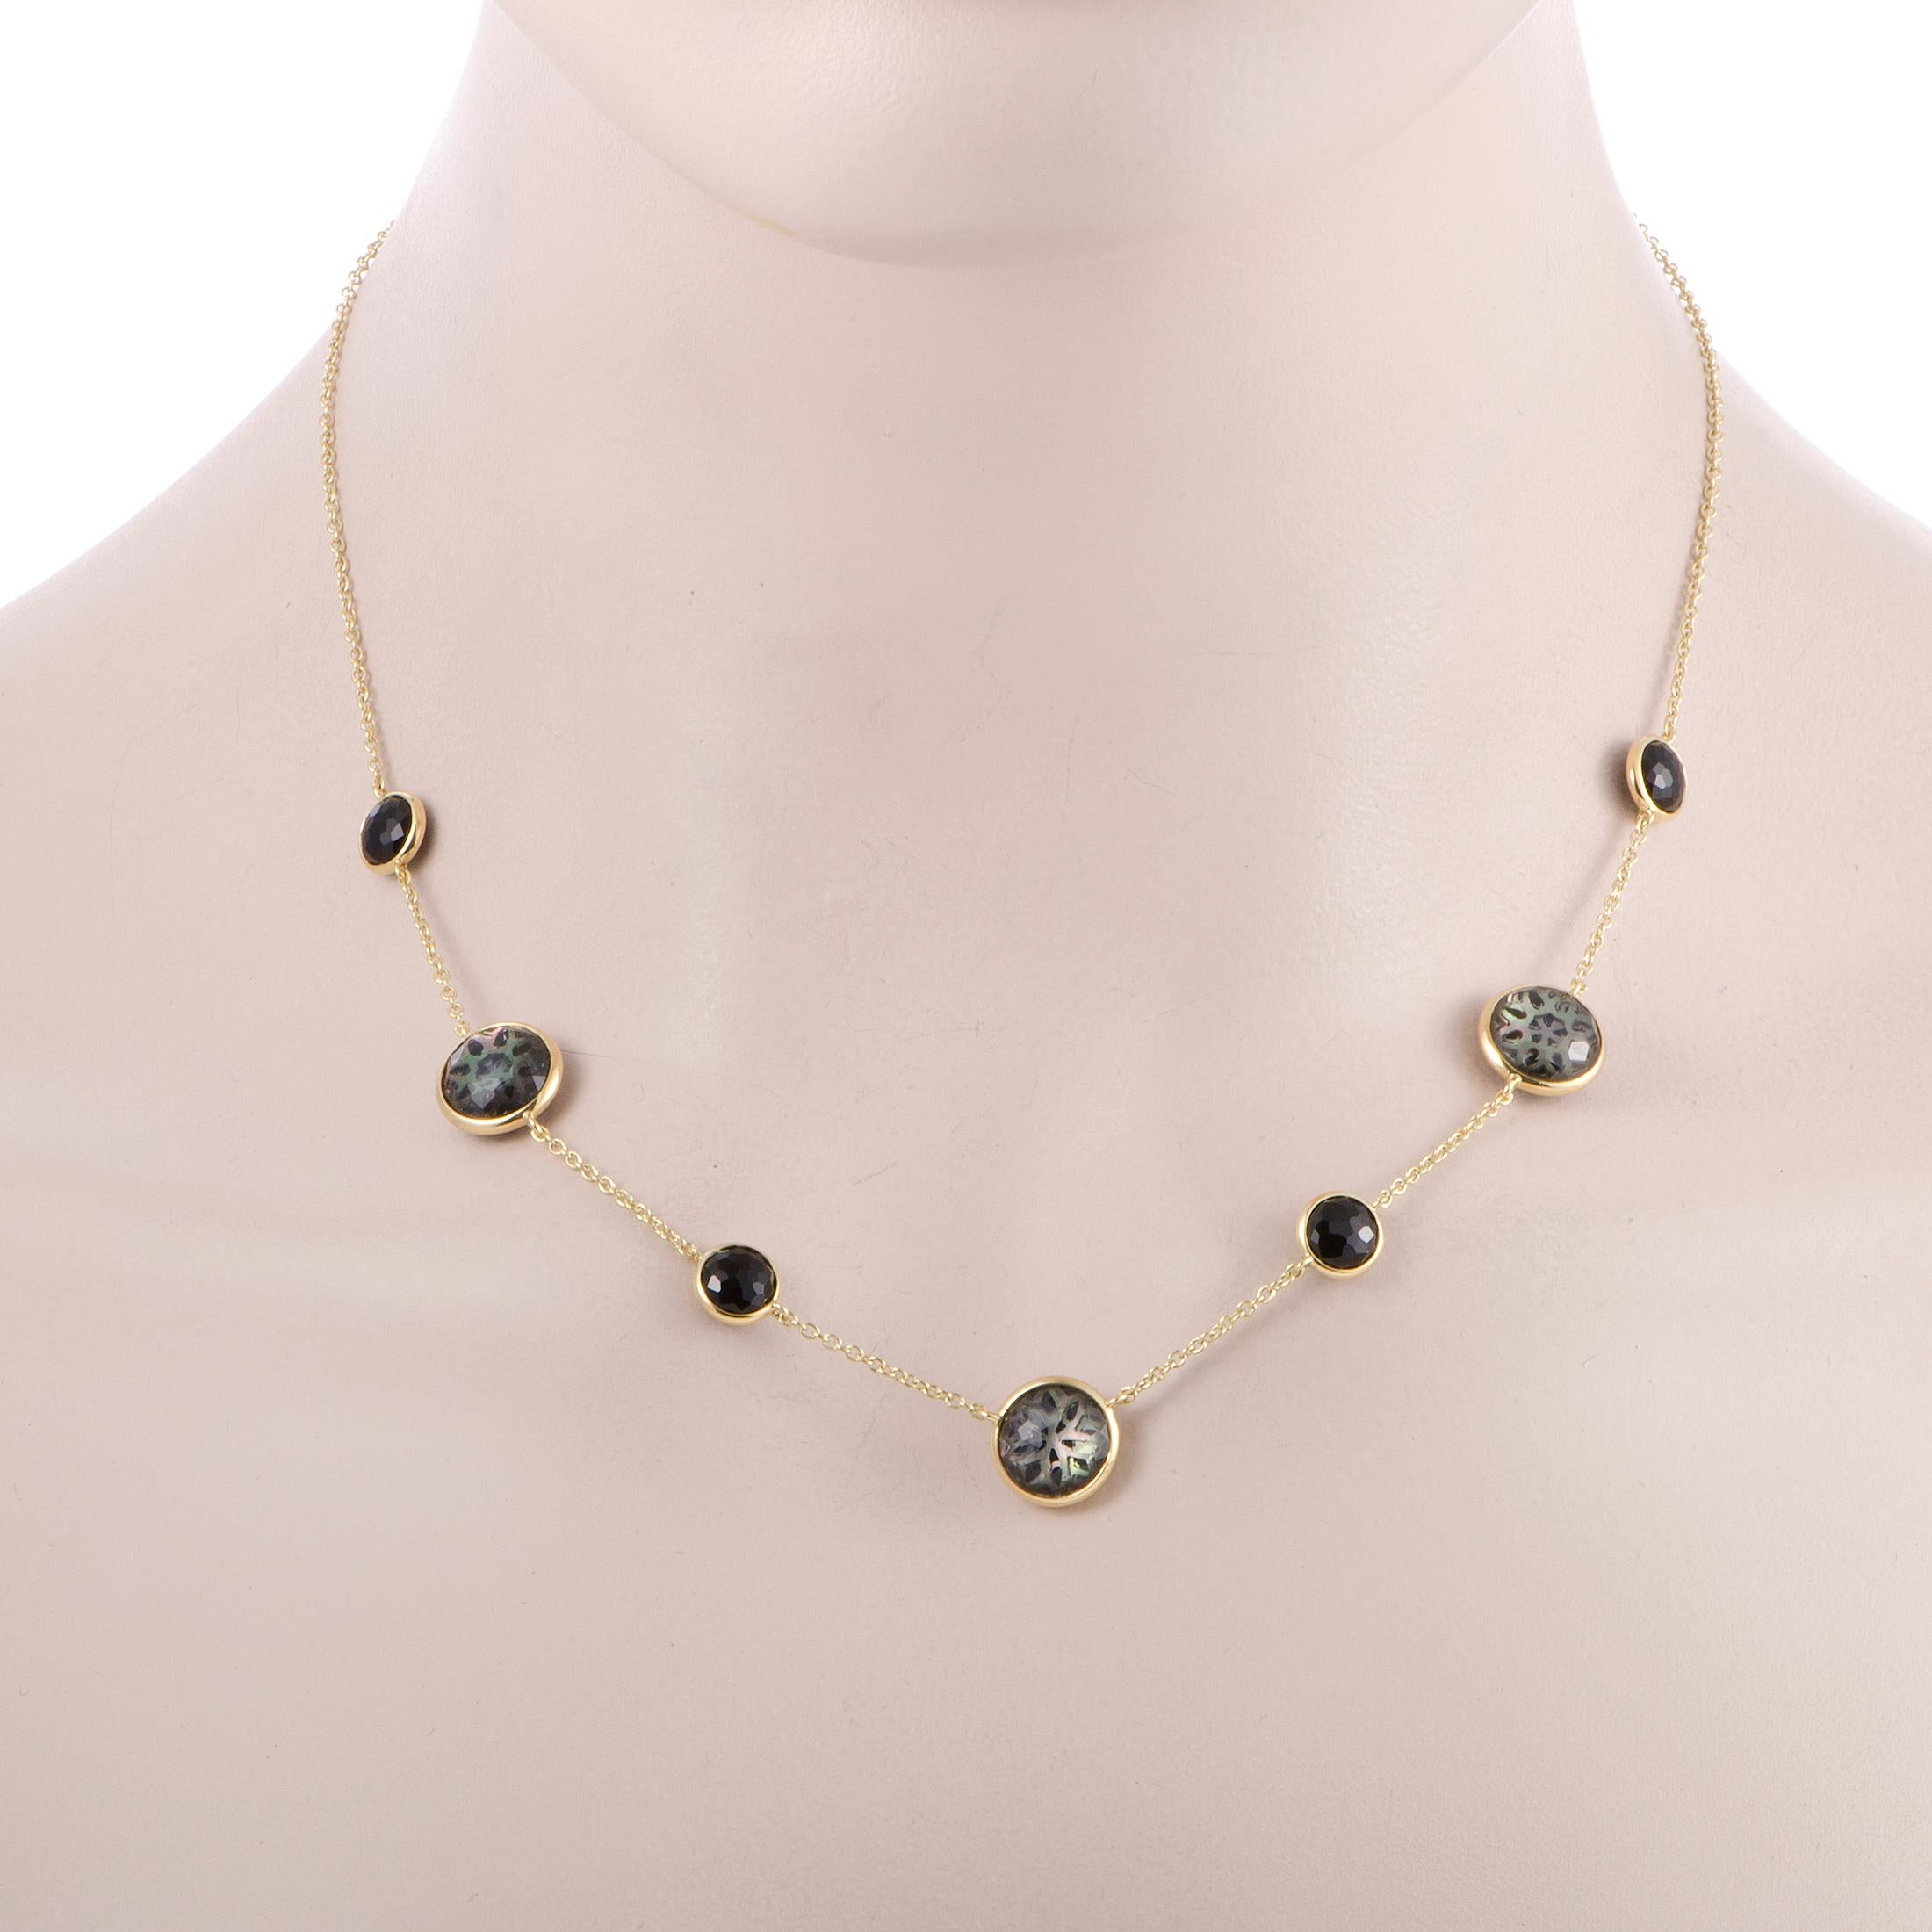 Designed for the exemplary “Rock Candy” collection by Ippolita, this sublime necklace is made of elegant 18K yellow gold and boasts captivating onyx, black mother of pearl and clear quartz, offering eye-catching prestigious appearance.
